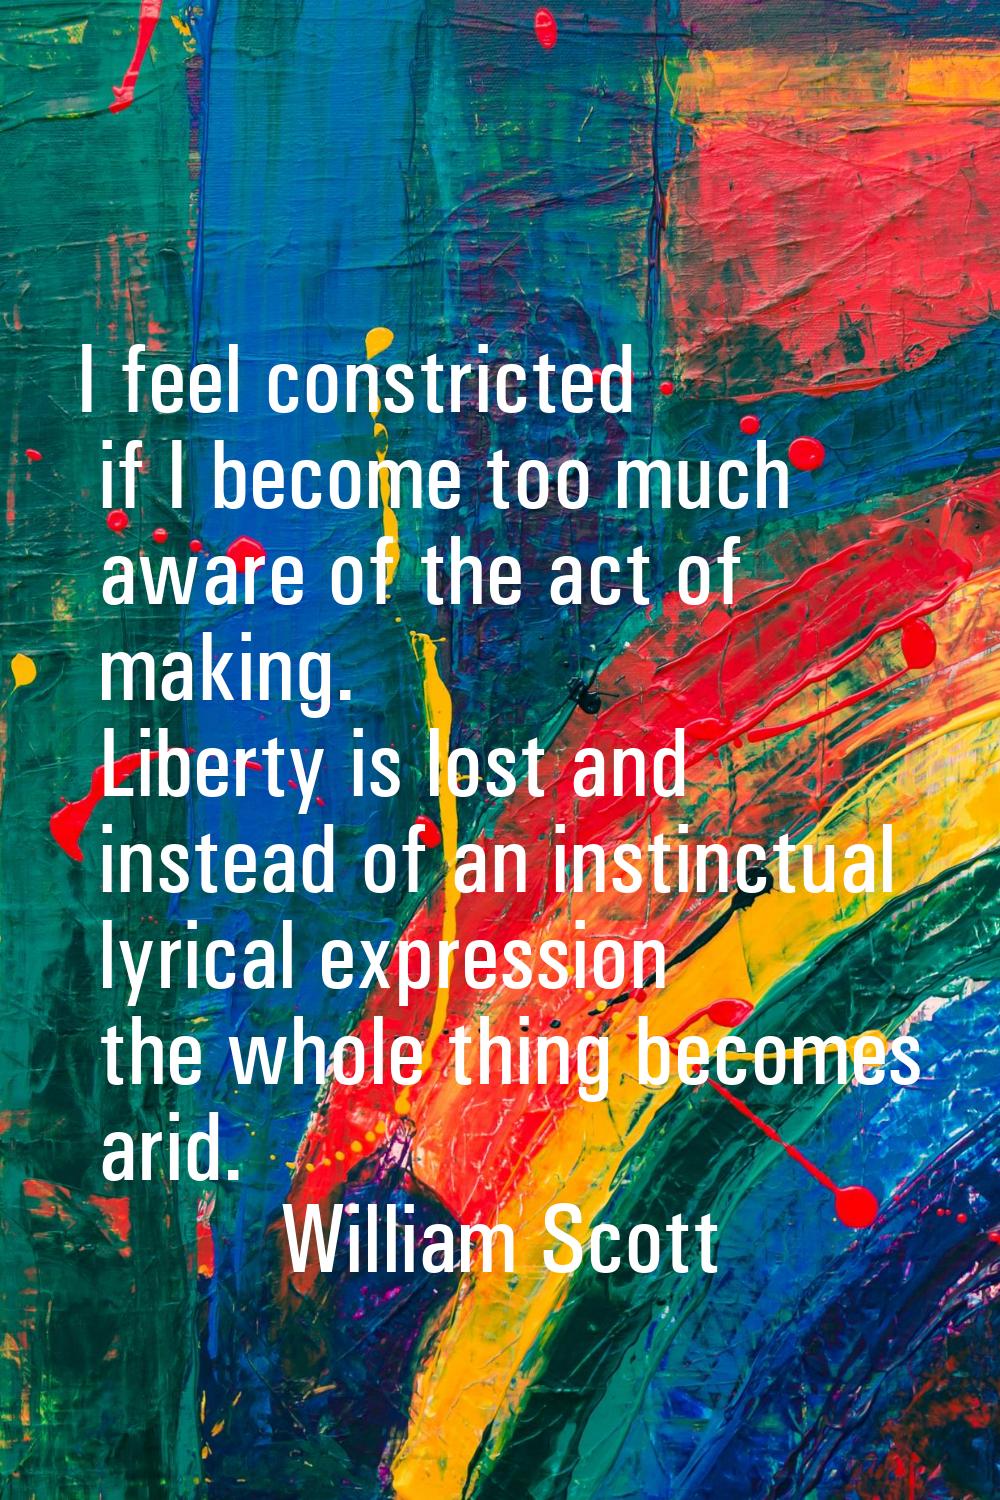 I feel constricted if I become too much aware of the act of making. Liberty is lost and instead of 